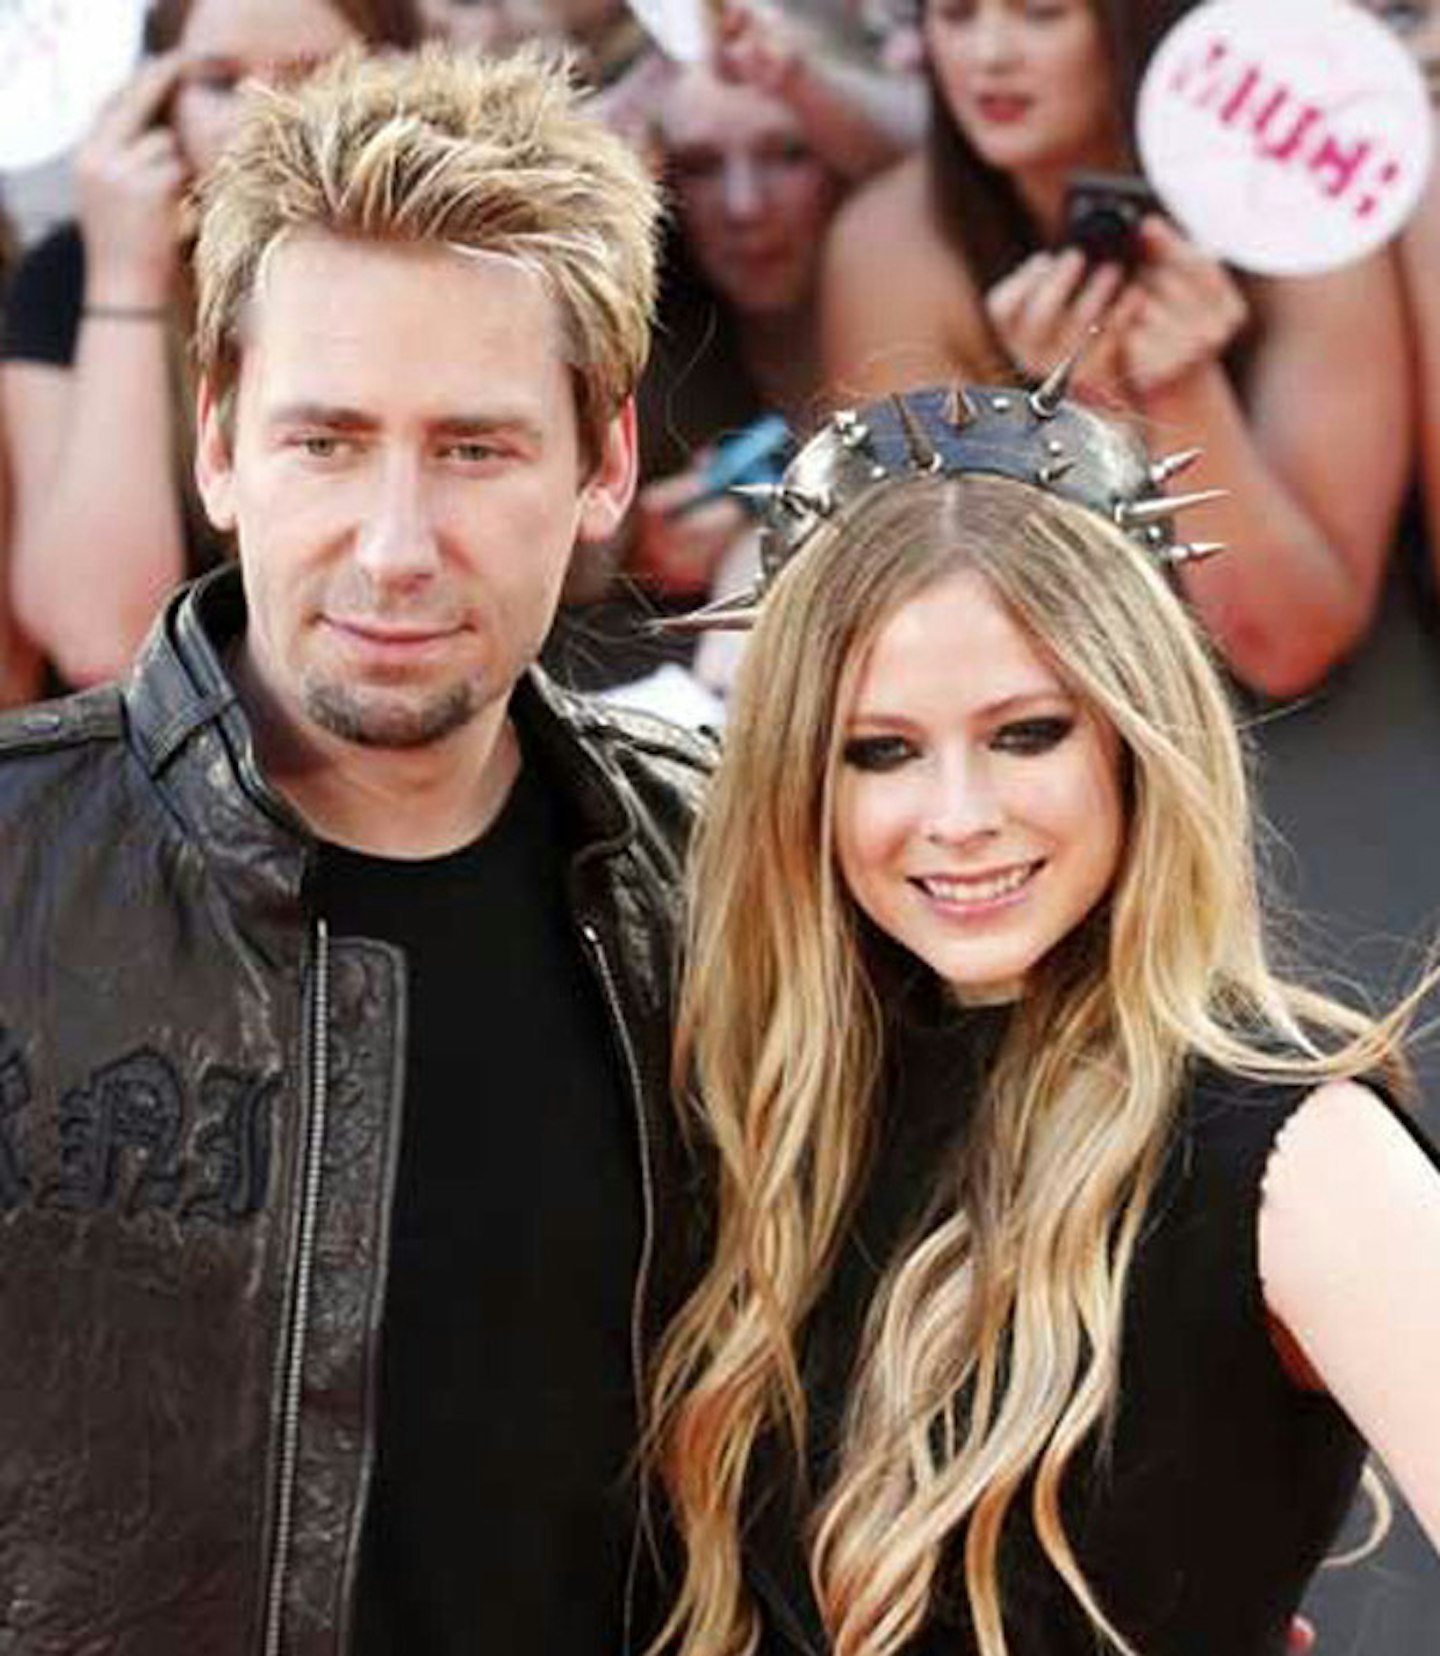 Deryck's ex Avril Lavine and Chad Kroeger! (Ouchie...)